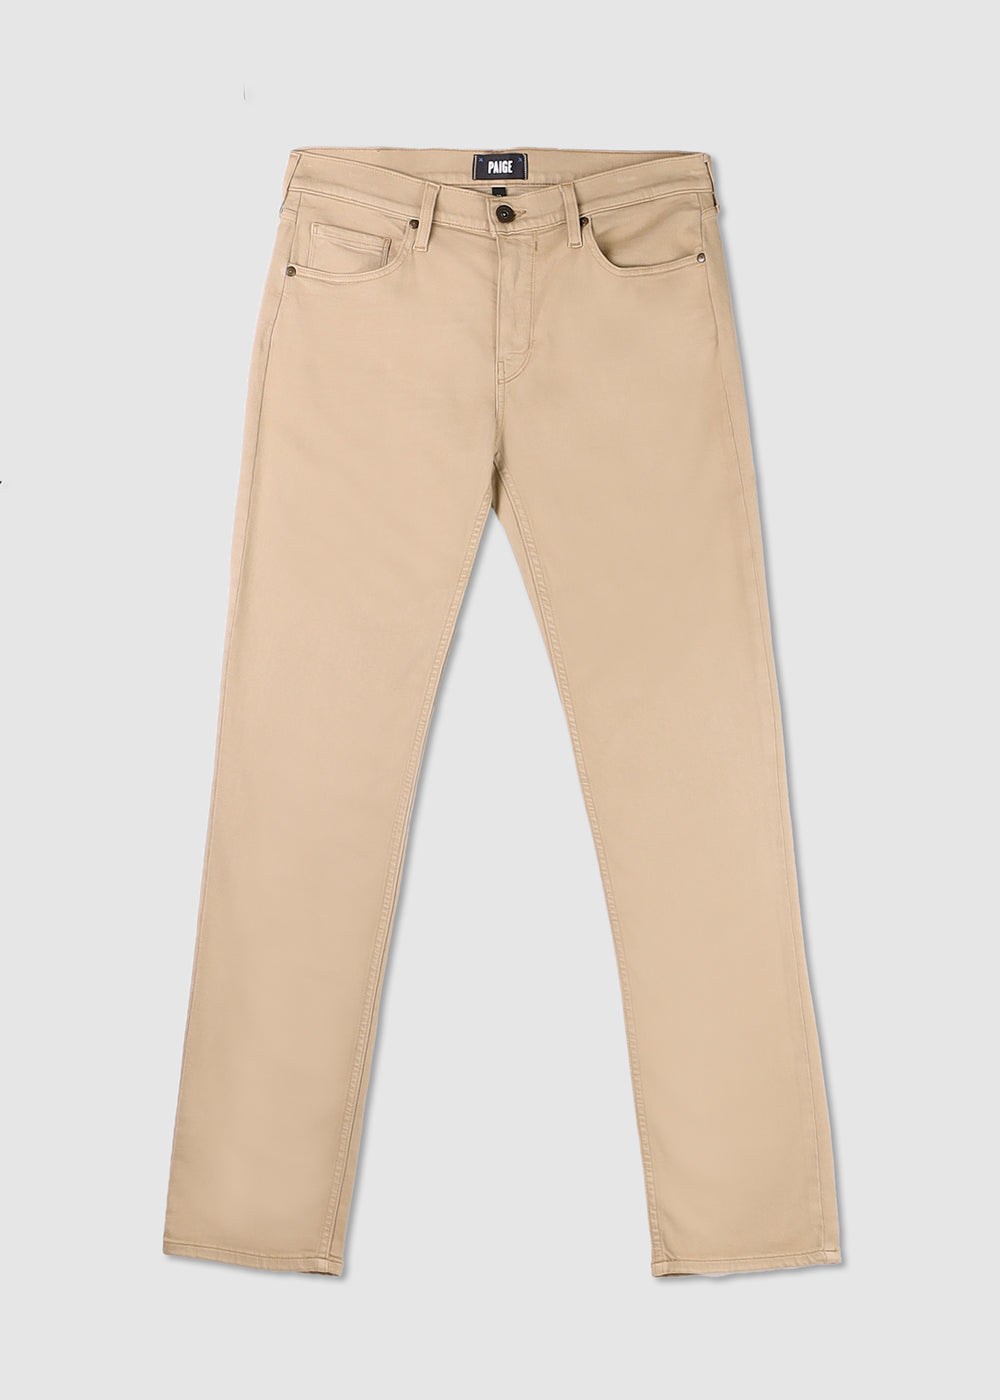 Image of Paige Mens Lennox Jeans In Wheat Harvest